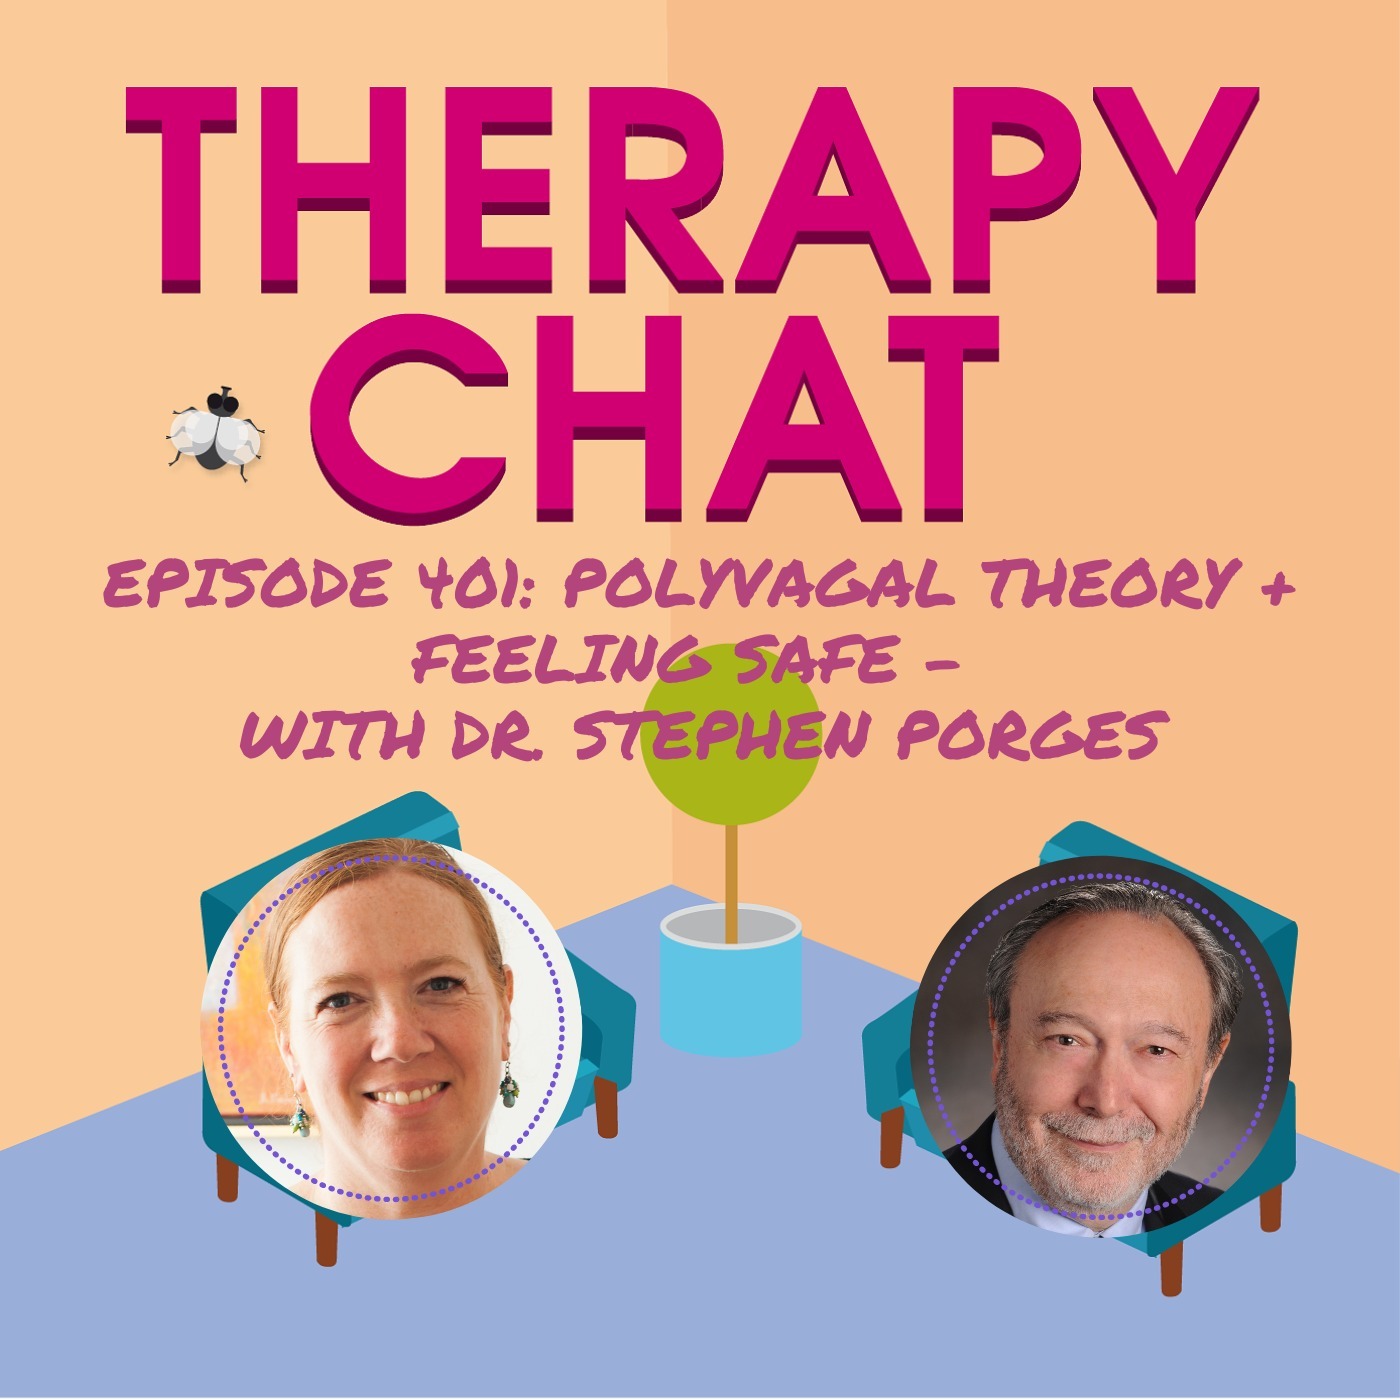 401: Polyvagal Theory + Feeling Safe With Dr. Stephen Porges